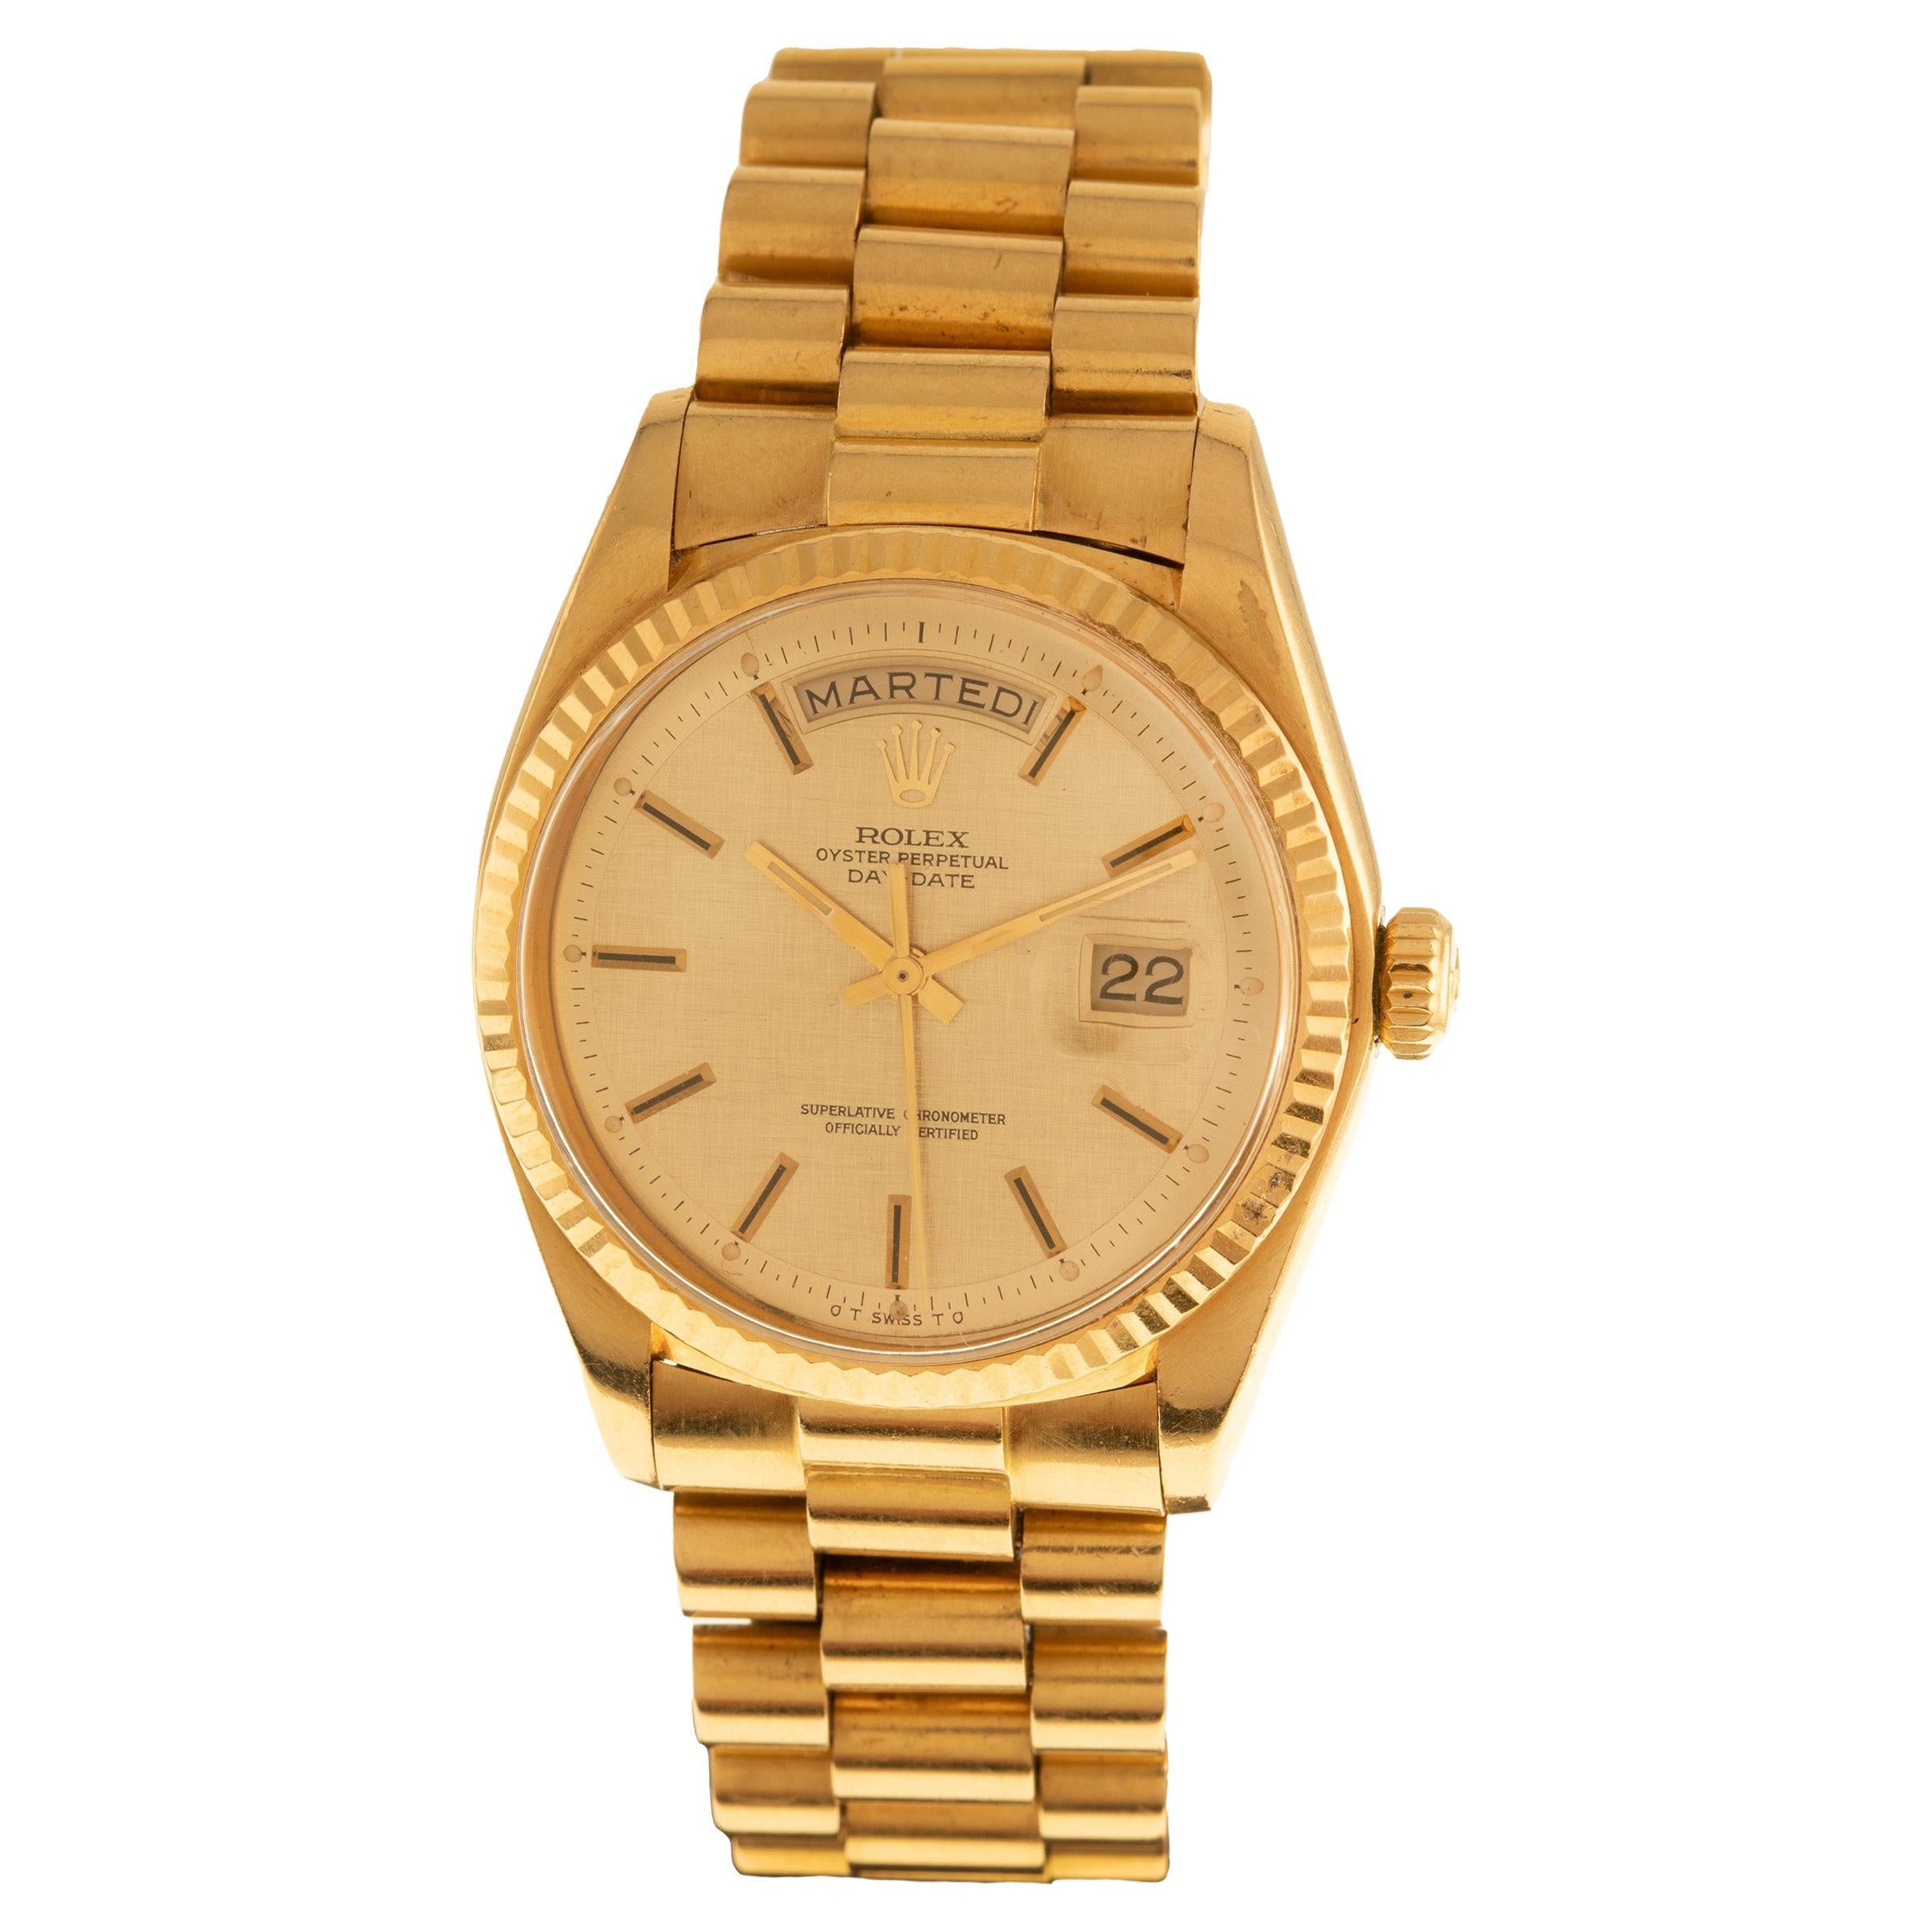 Rolex Oyster Perpetual Day Date in 18 Karat Yellow Gold with Gold Rolex Bracelet For Sale